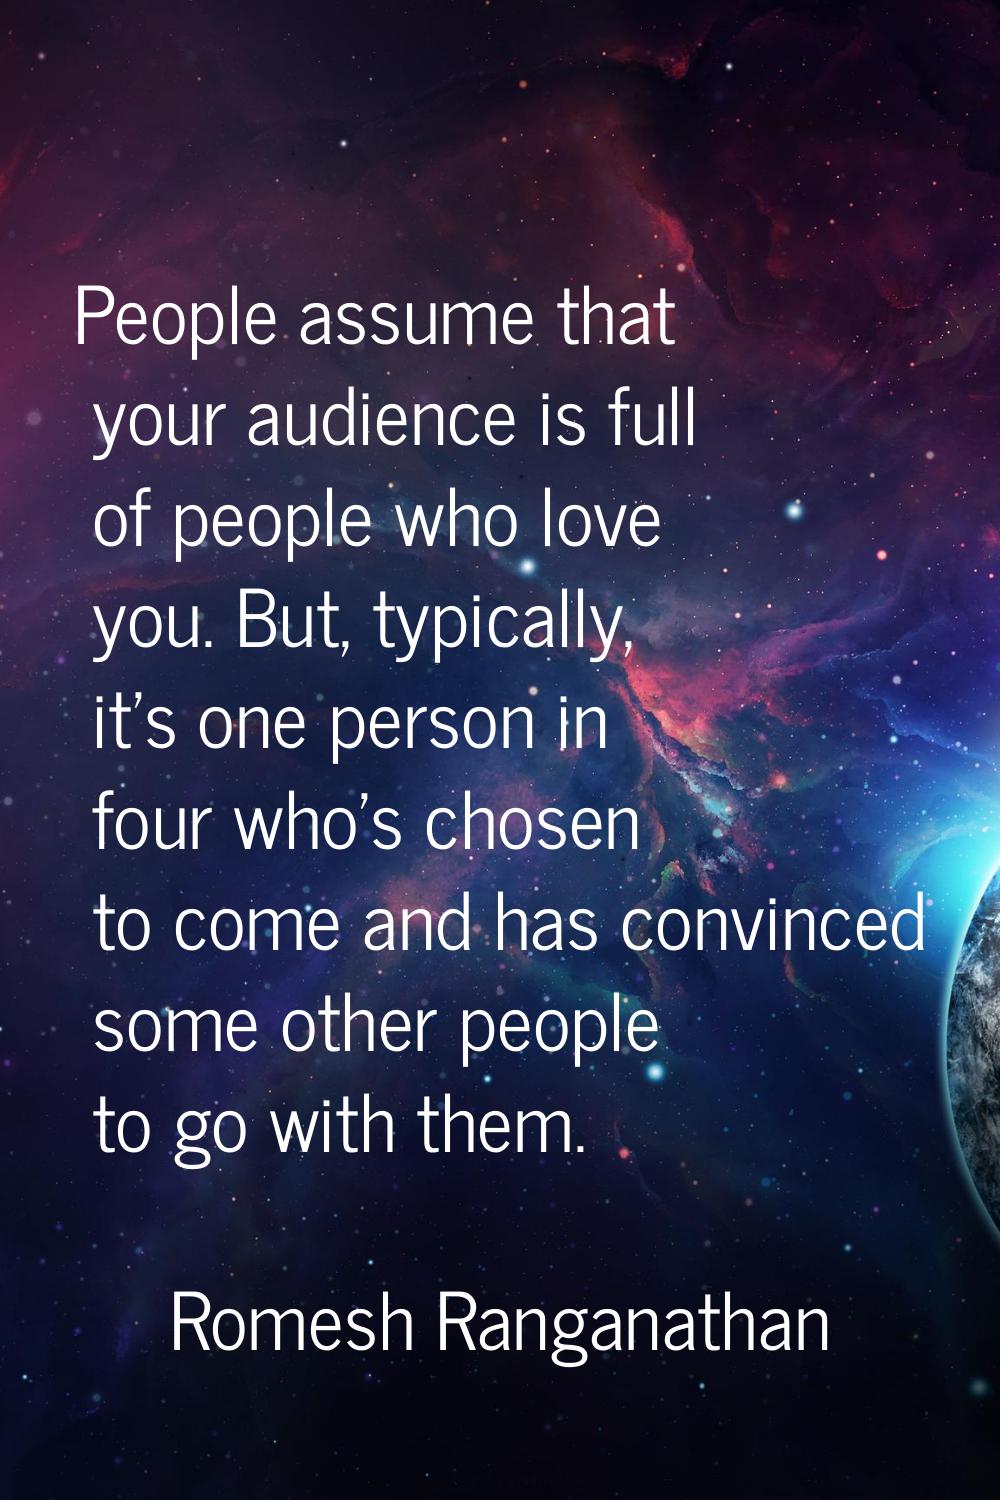 People assume that your audience is full of people who love you. But, typically, it's one person in